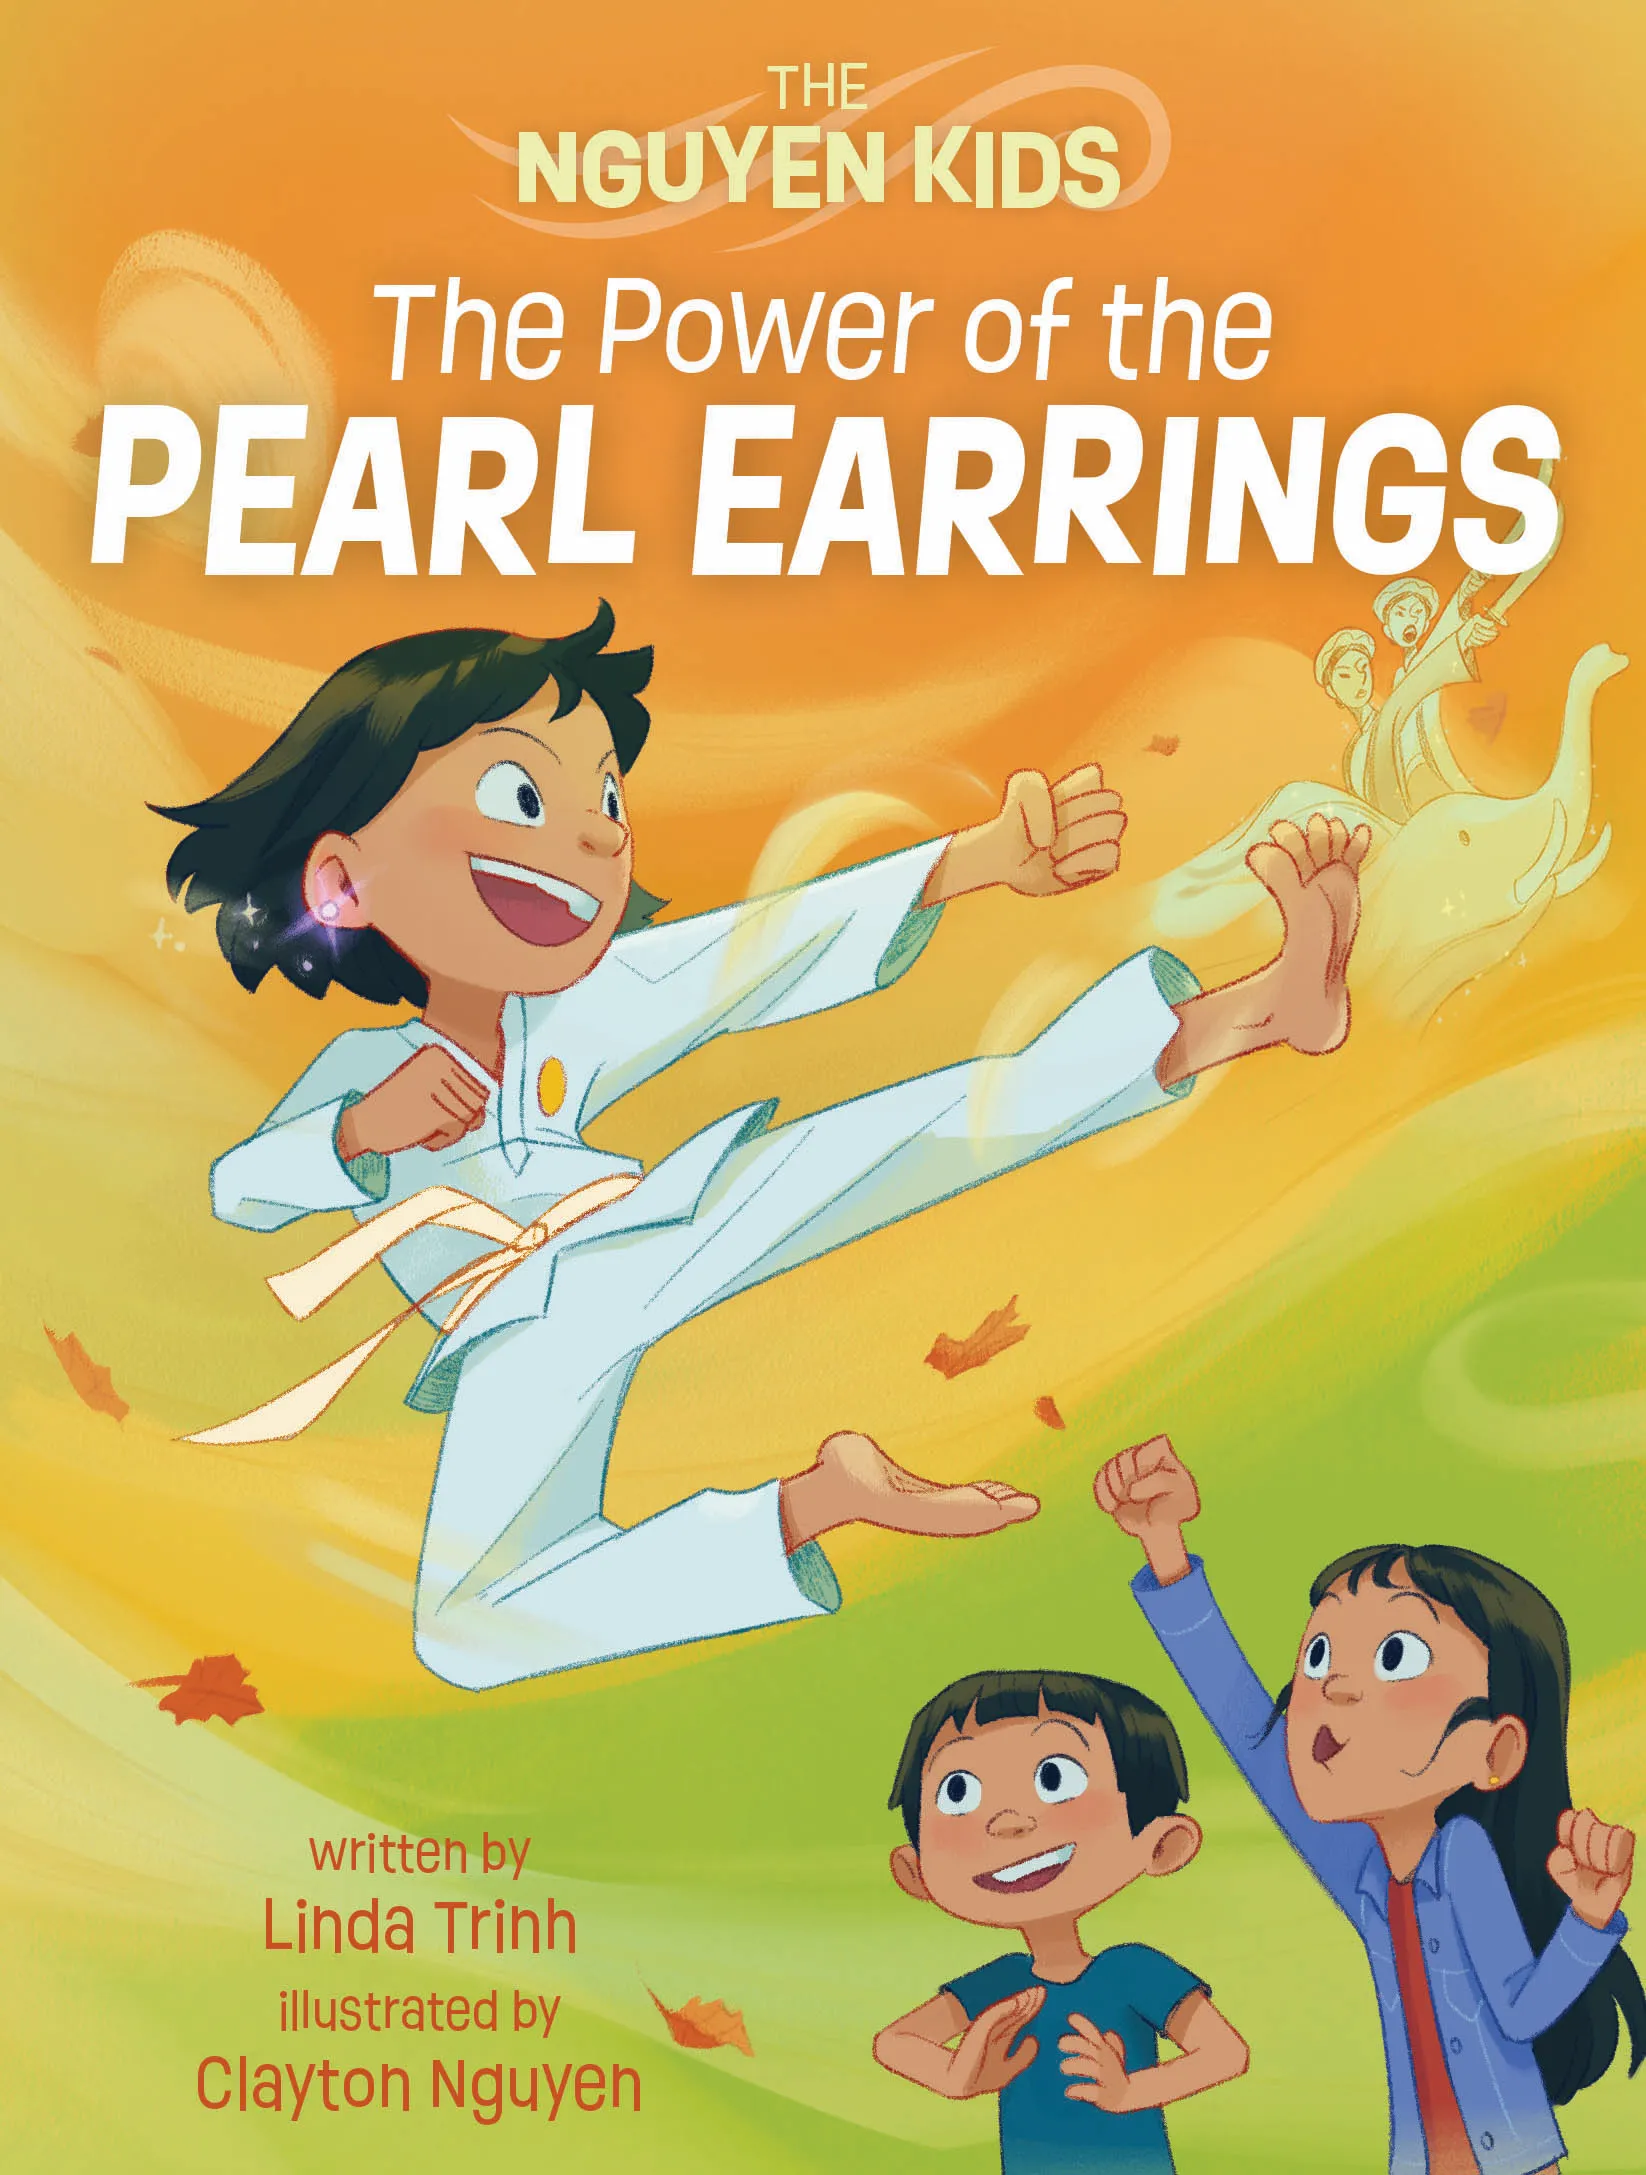 The Power of the Pearl Earrings (The Nguyen Kids #2)